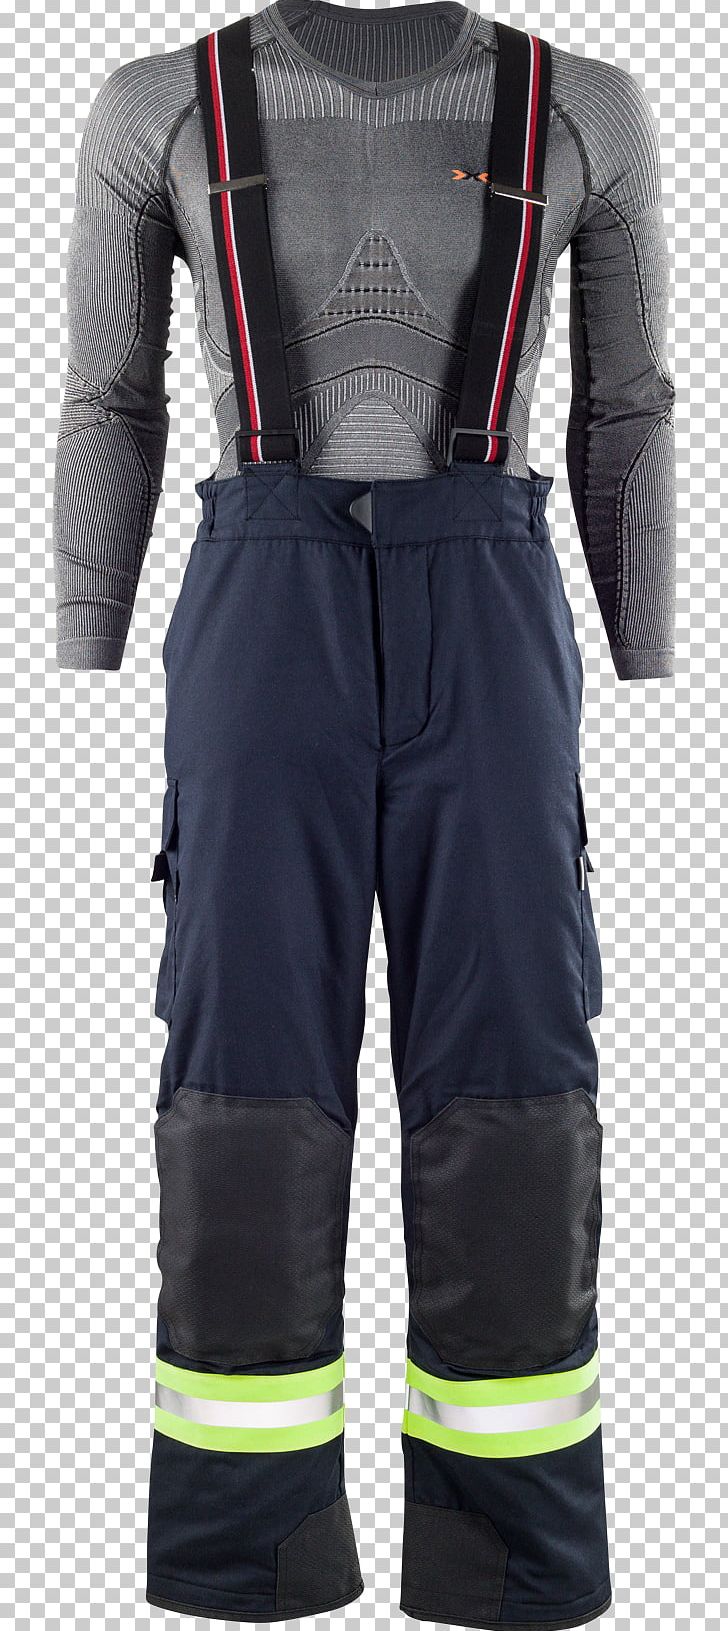 Pants Fire Department Clothing Motorcycle Personal Protective Equipment Fire Hose PNG, Clipart, Boilersuit, Fir, Firefighter, Firefighting, Fire Hose Free PNG Download